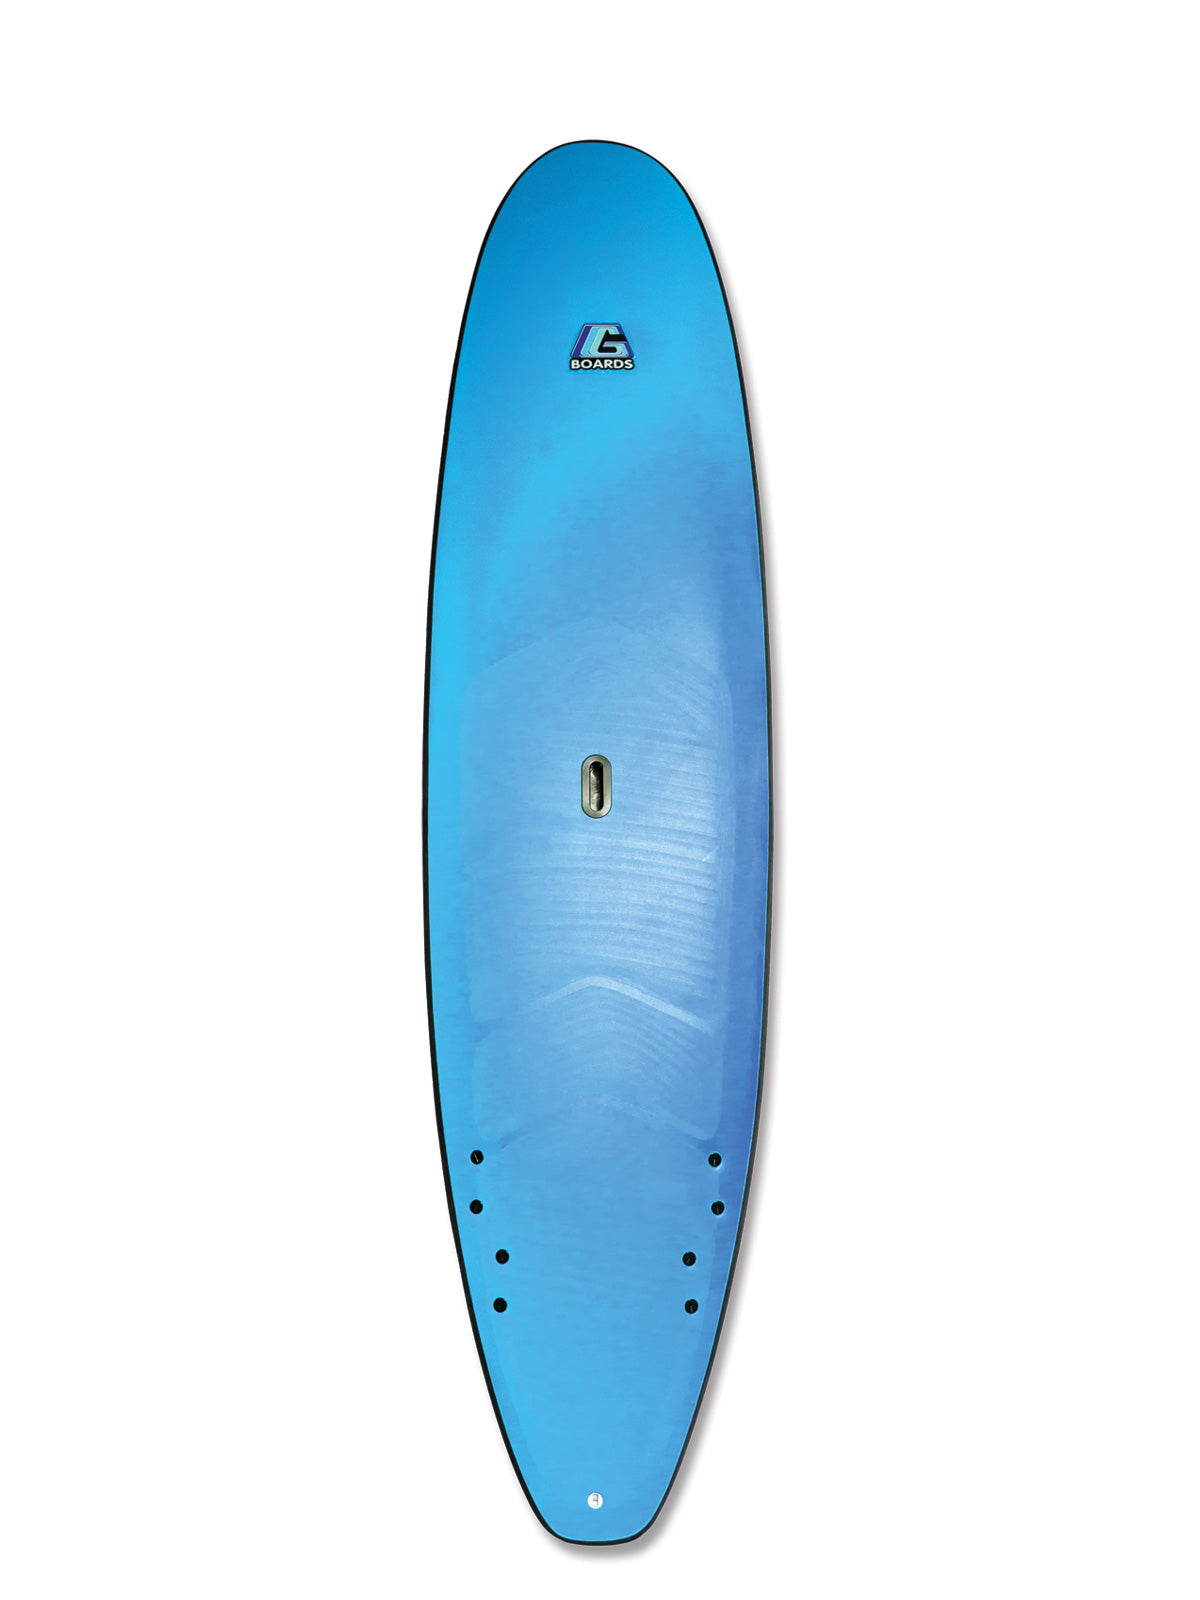 STAND UP PADDLEBOARD 9'6 x 30" x 4 1/2" (157 Litres)